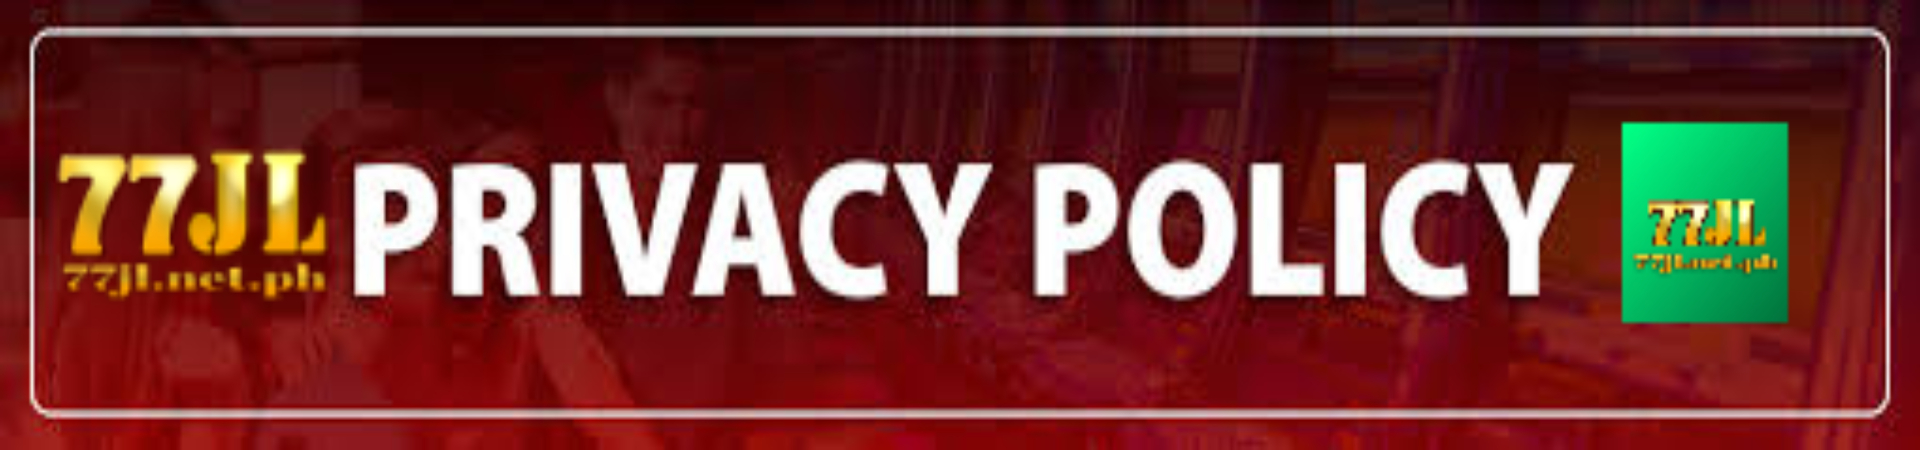 privacy policy 77jl banner 08